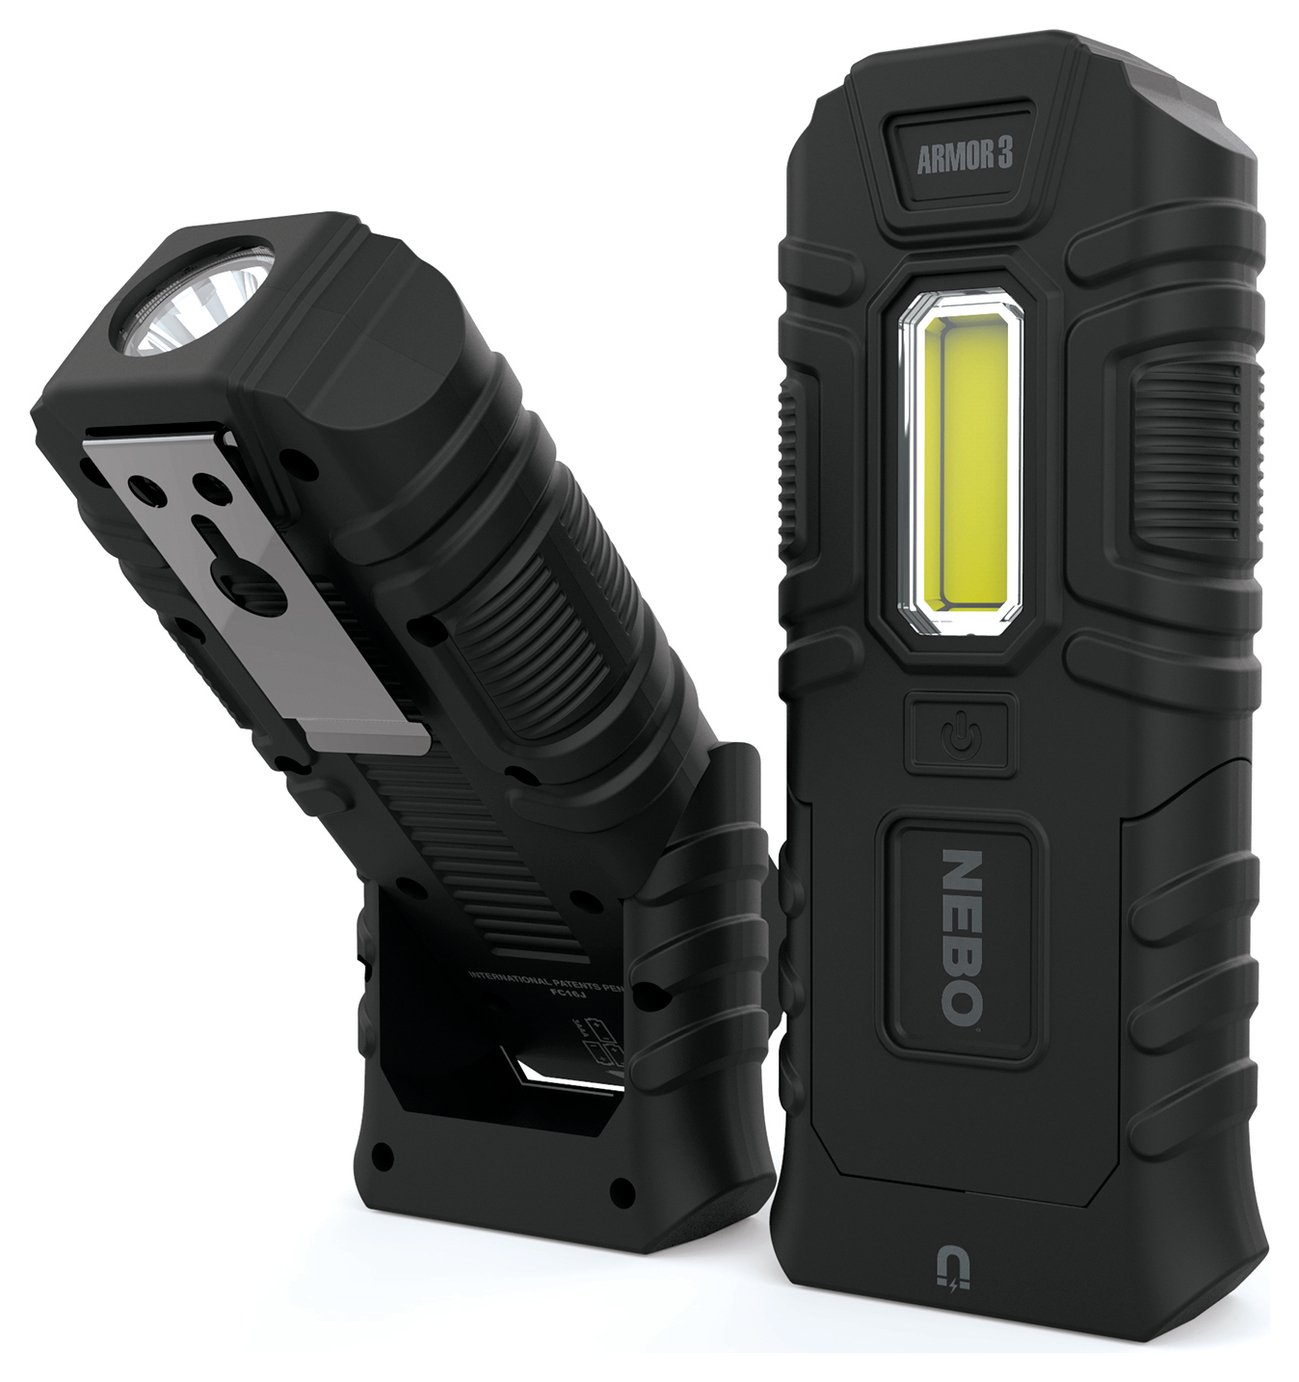 Nebo Armor 3 360 Lumen LED Torch Review